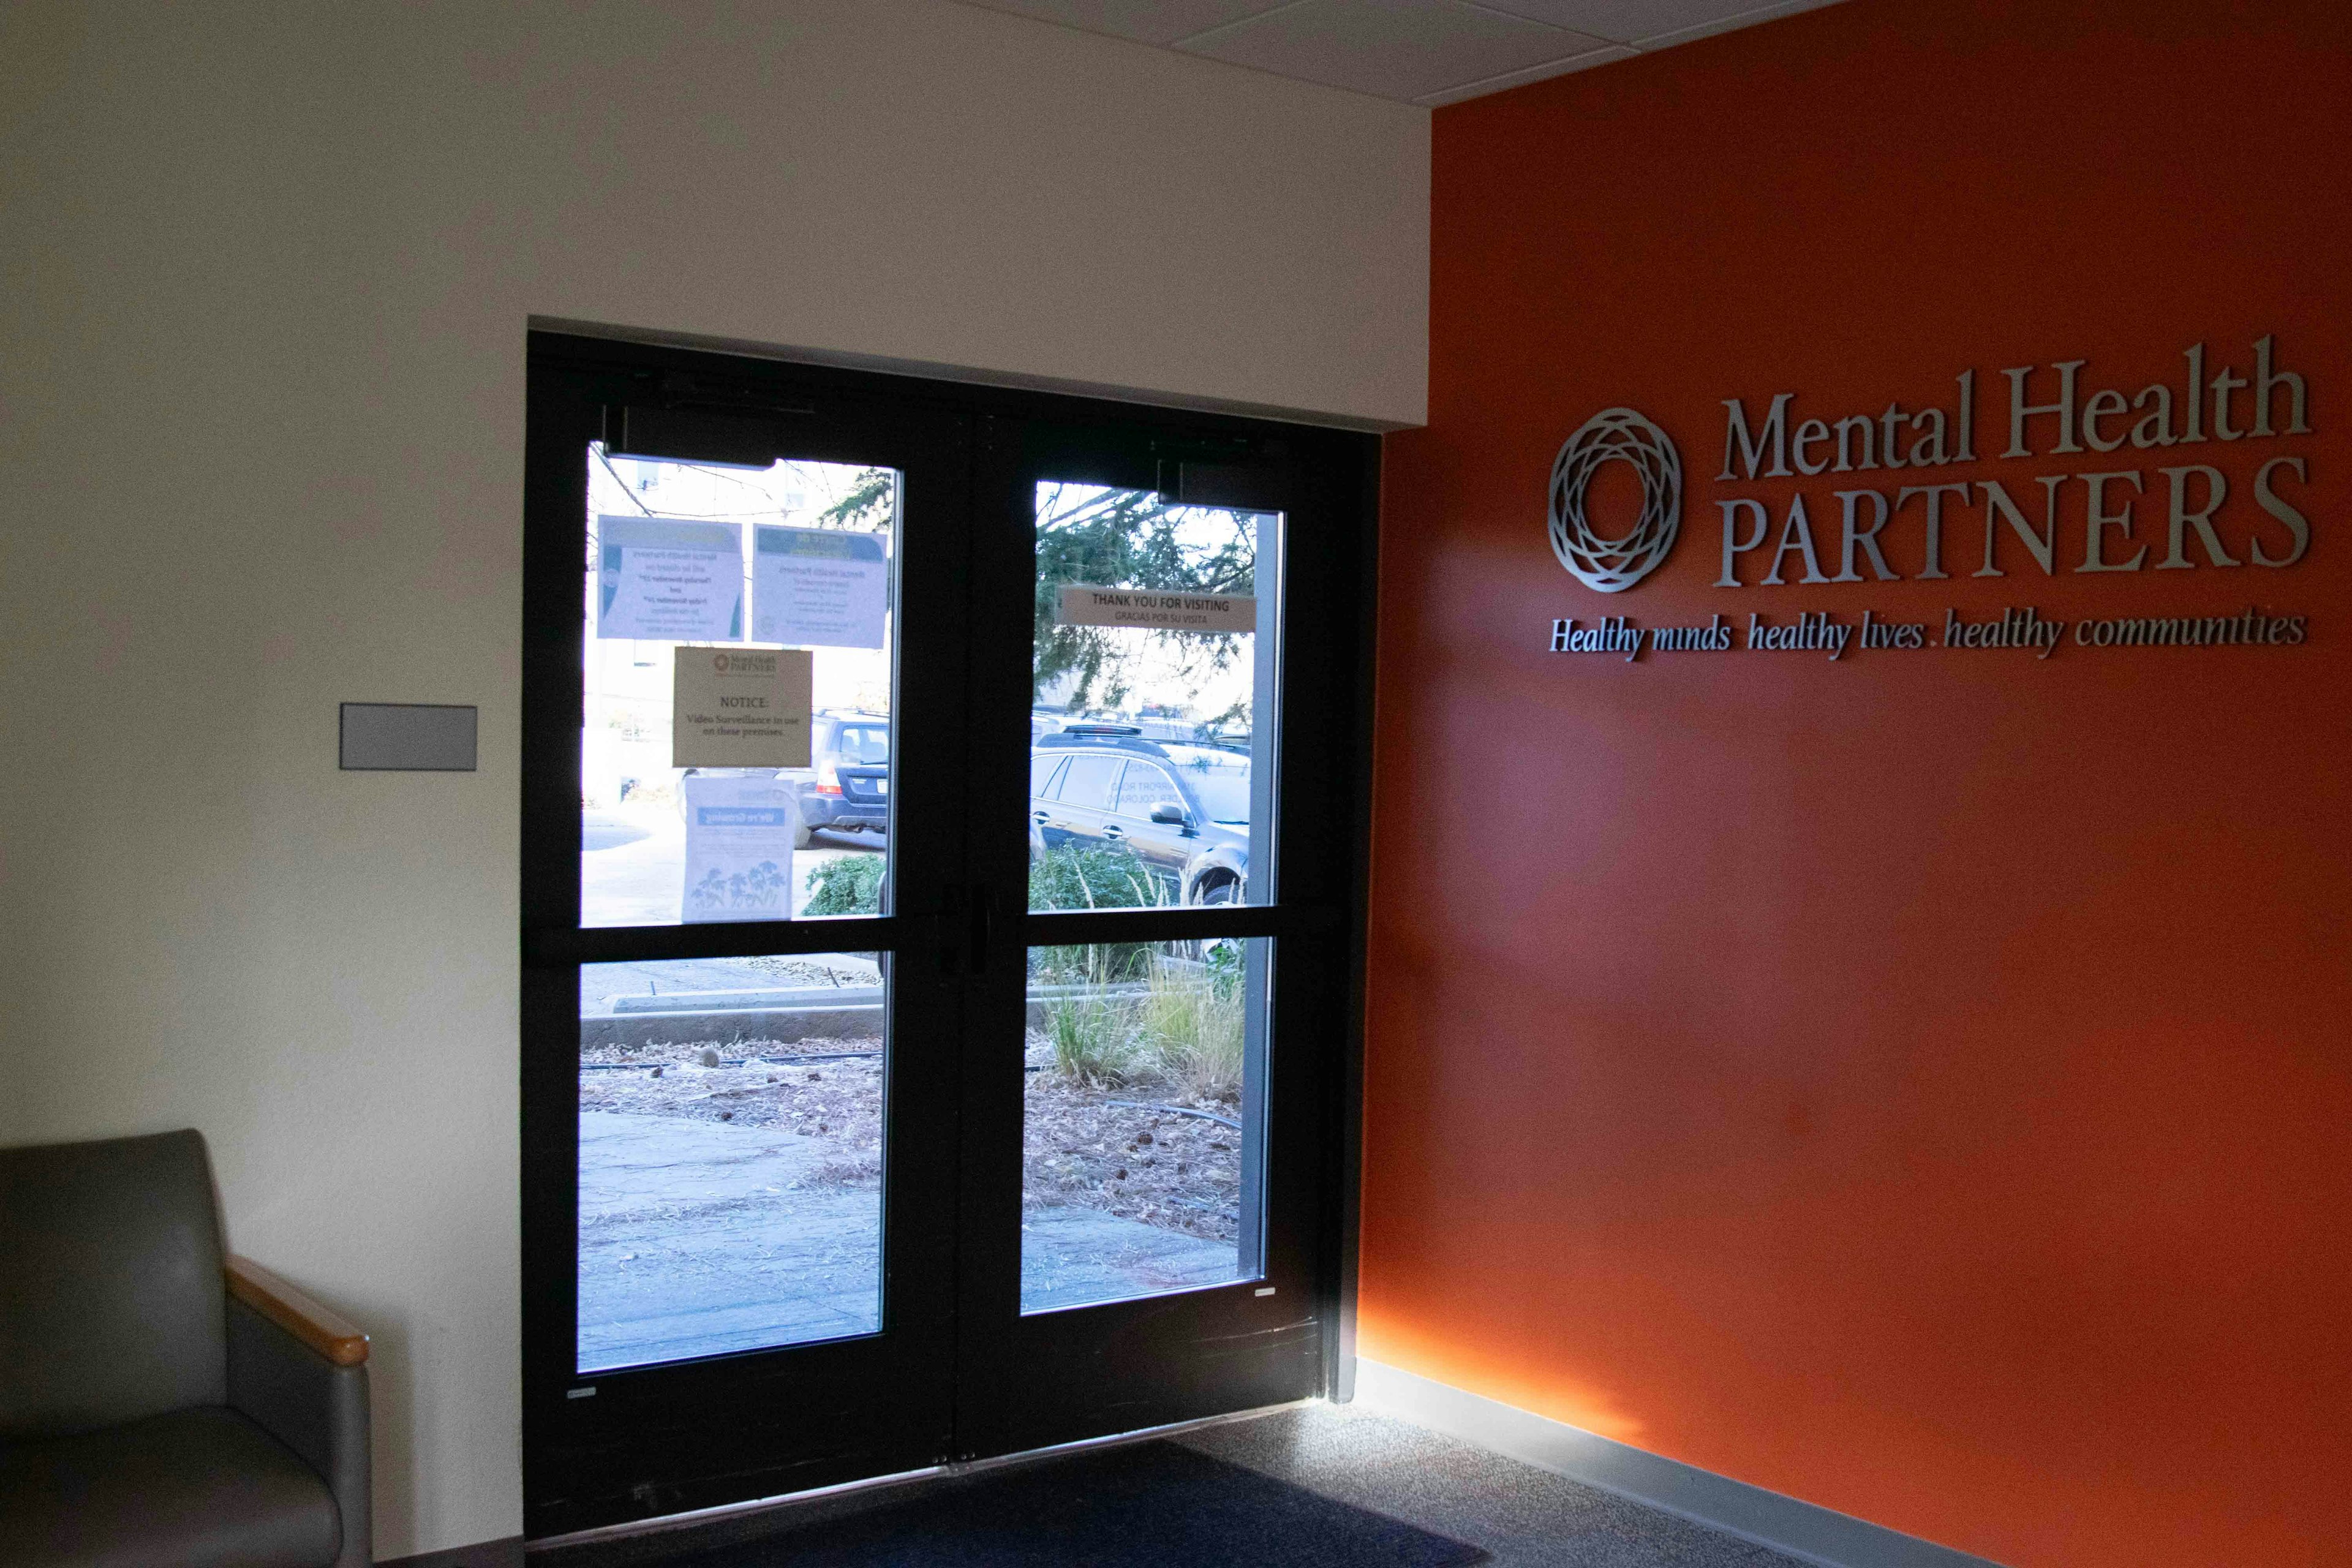 Entry door to Norton building. Glass doors, red wall, and Mental Health Partners logo.